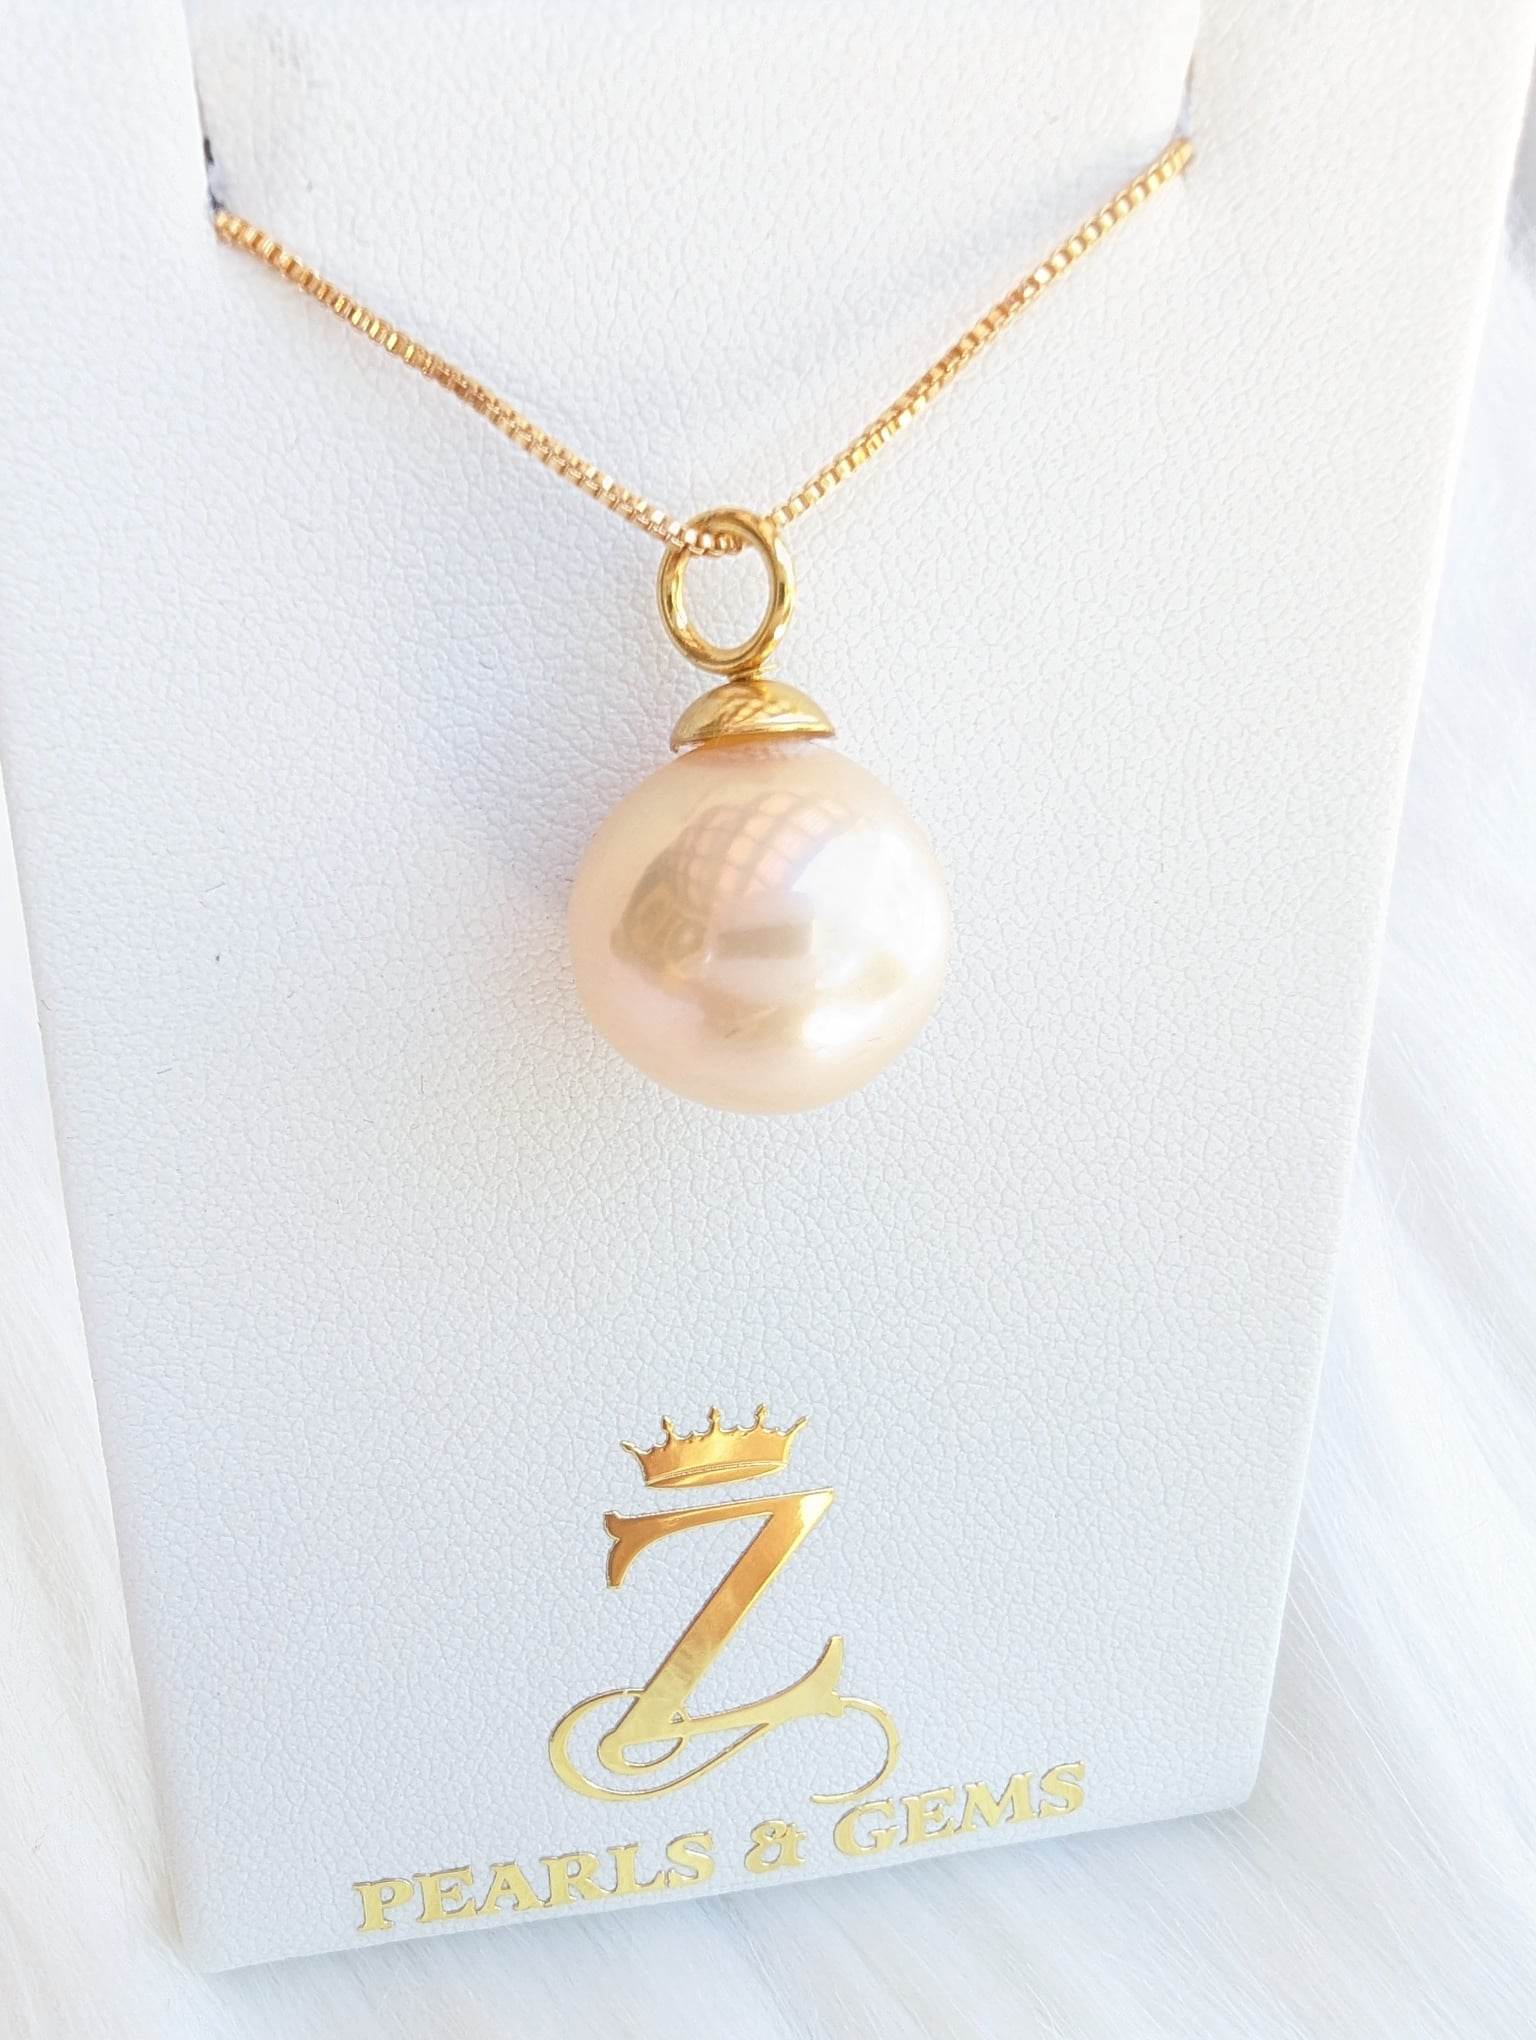 Delilah Edison Pink Pearl Necklace | Z Pearls & Gems